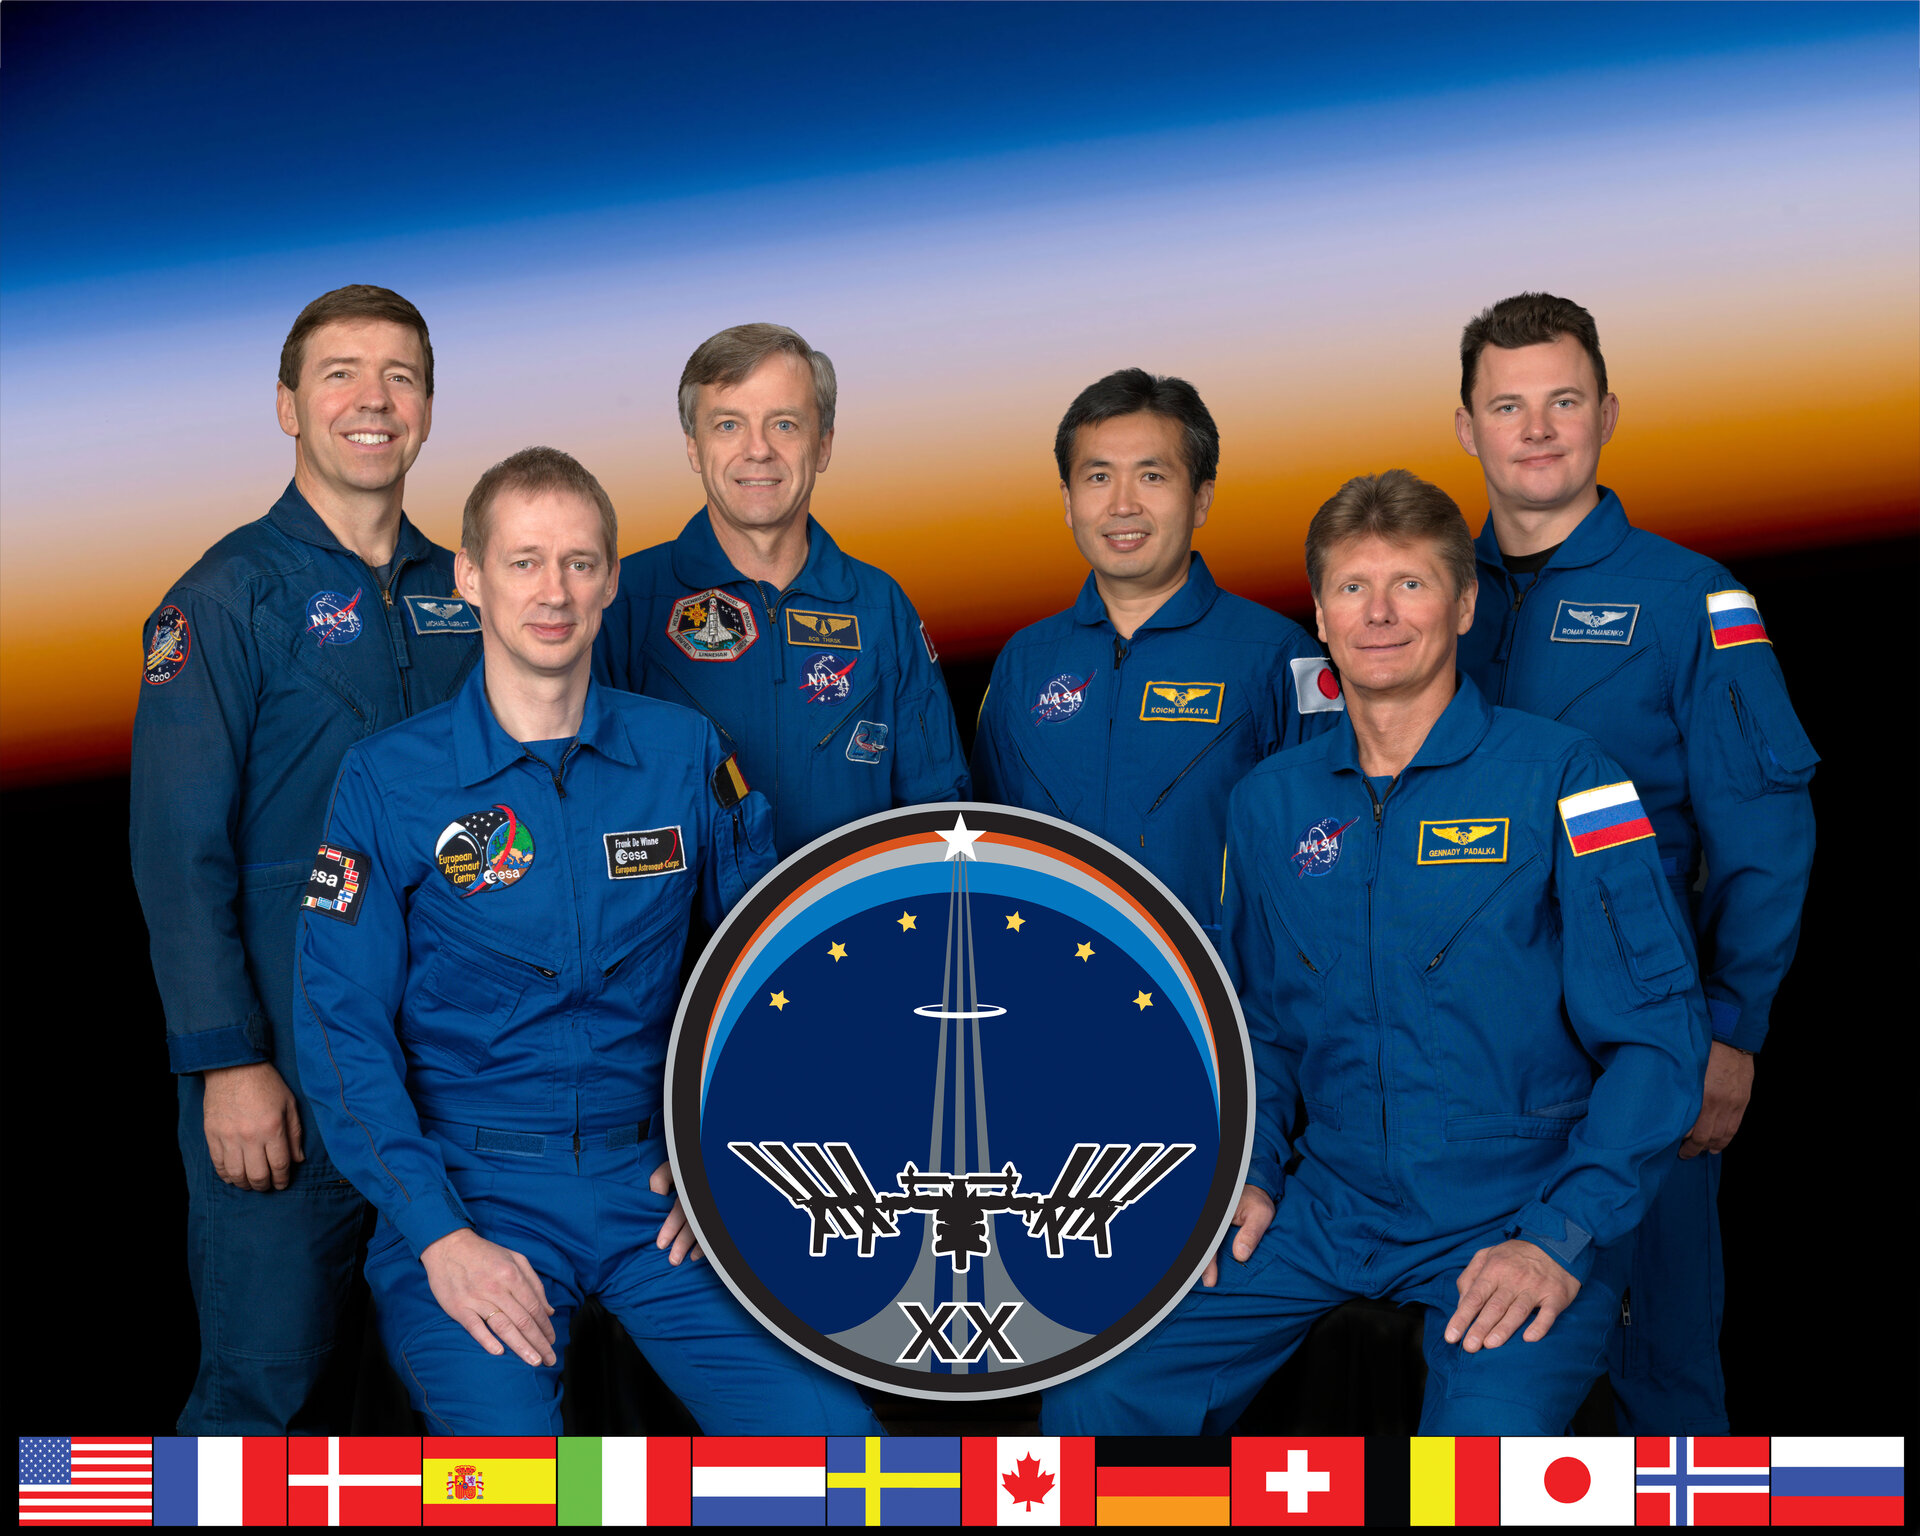 All six members of the Expedition 20 crew will participate in the crew news conference on 1 June